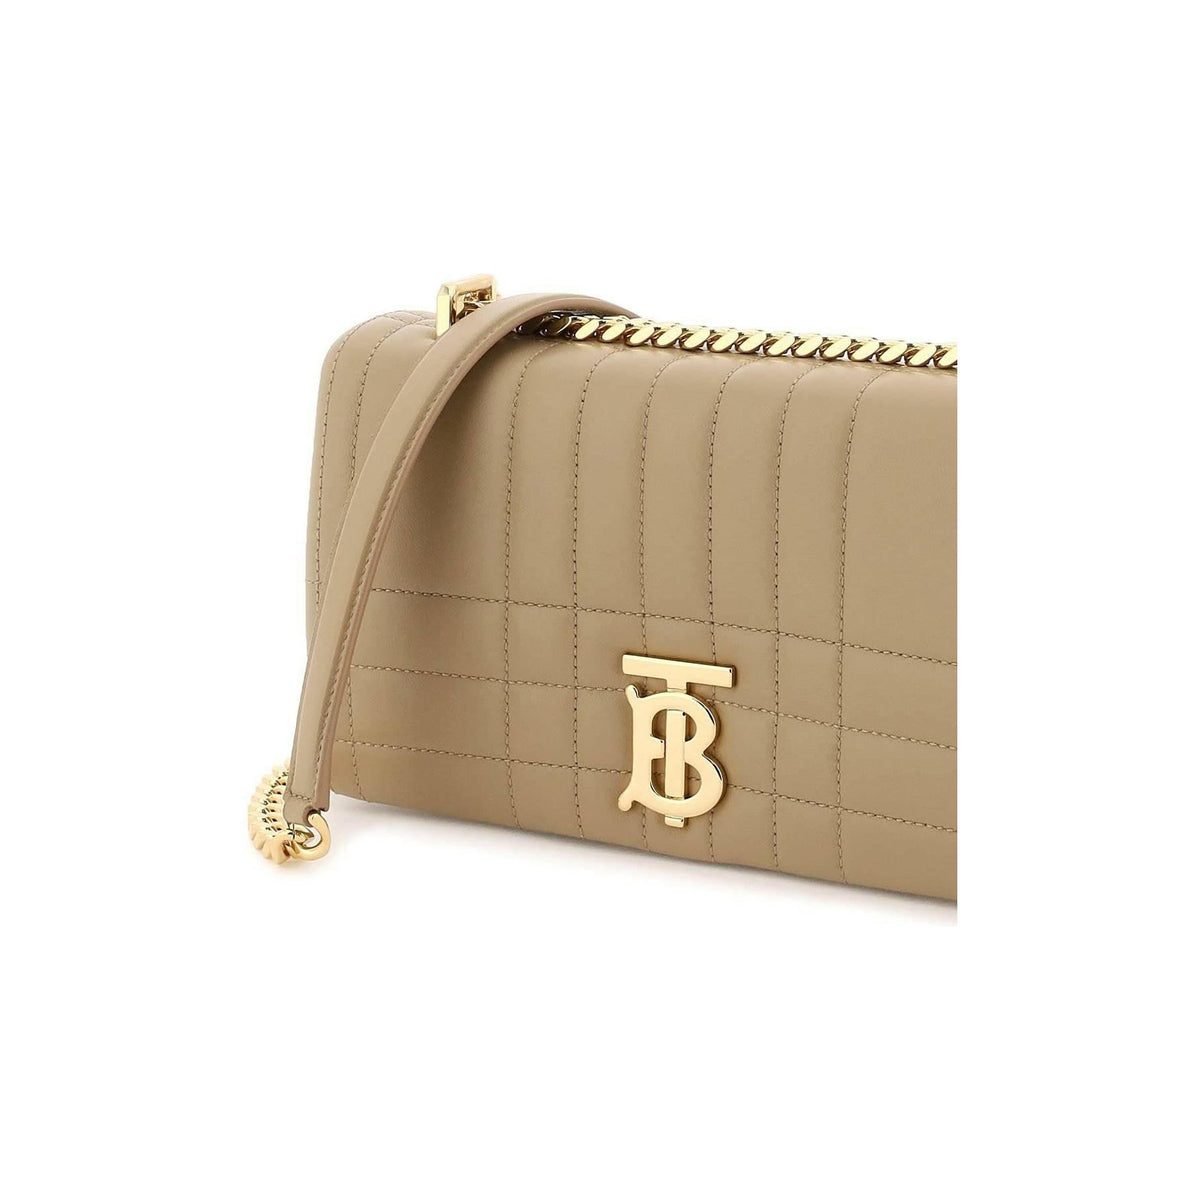 Oat Beige Quilted Leather Small Lola Bag BURBERRY JOHN JULIA.